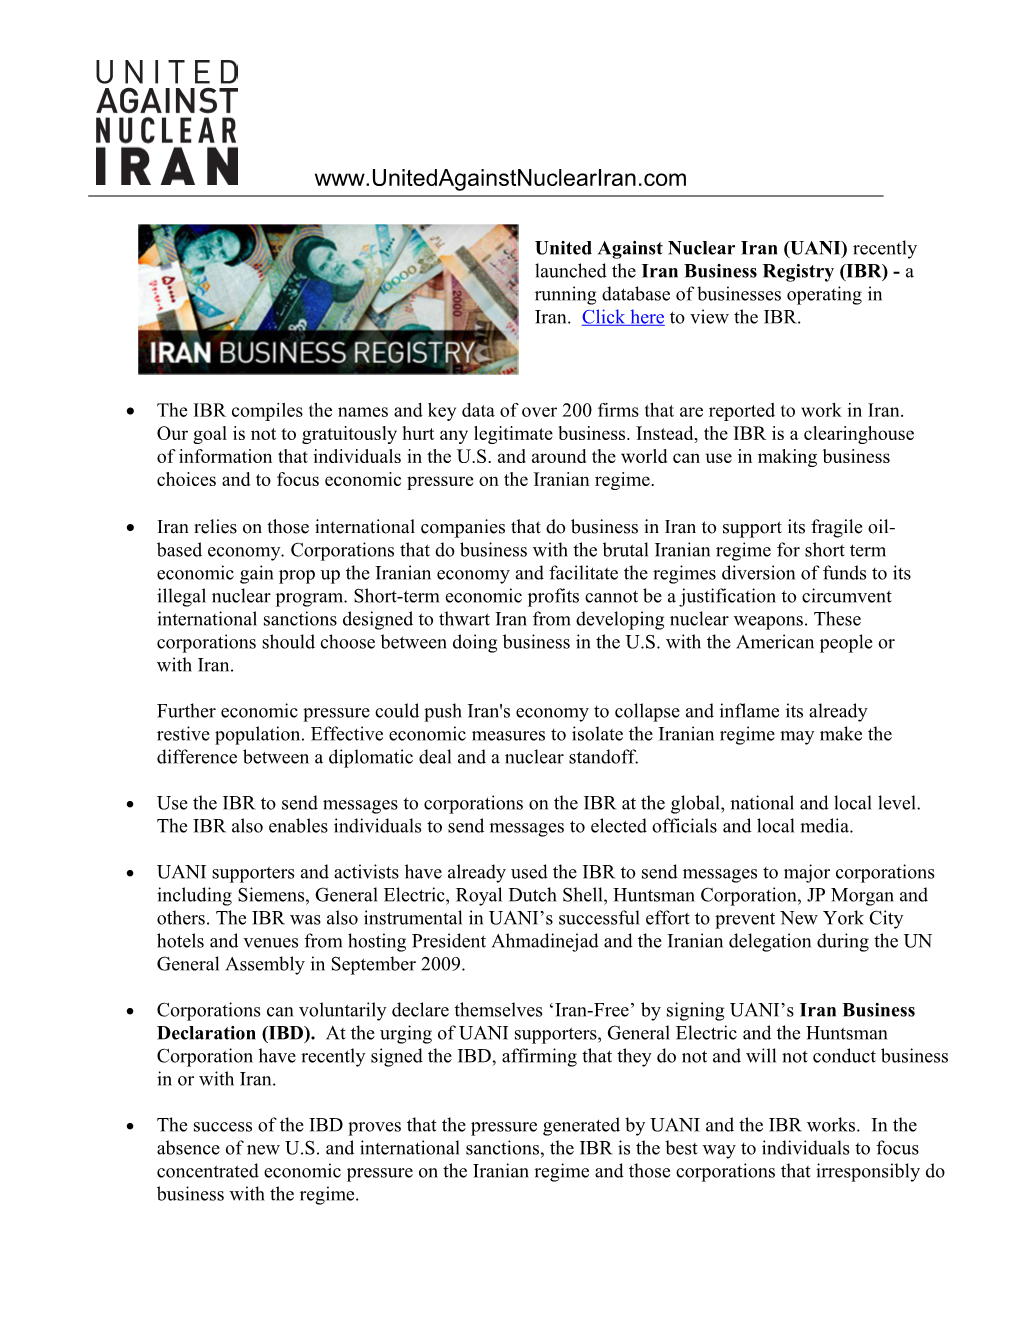 United Against Nuclear Iran (UANI) Recently Launched Theiran Business Registry (IBR)